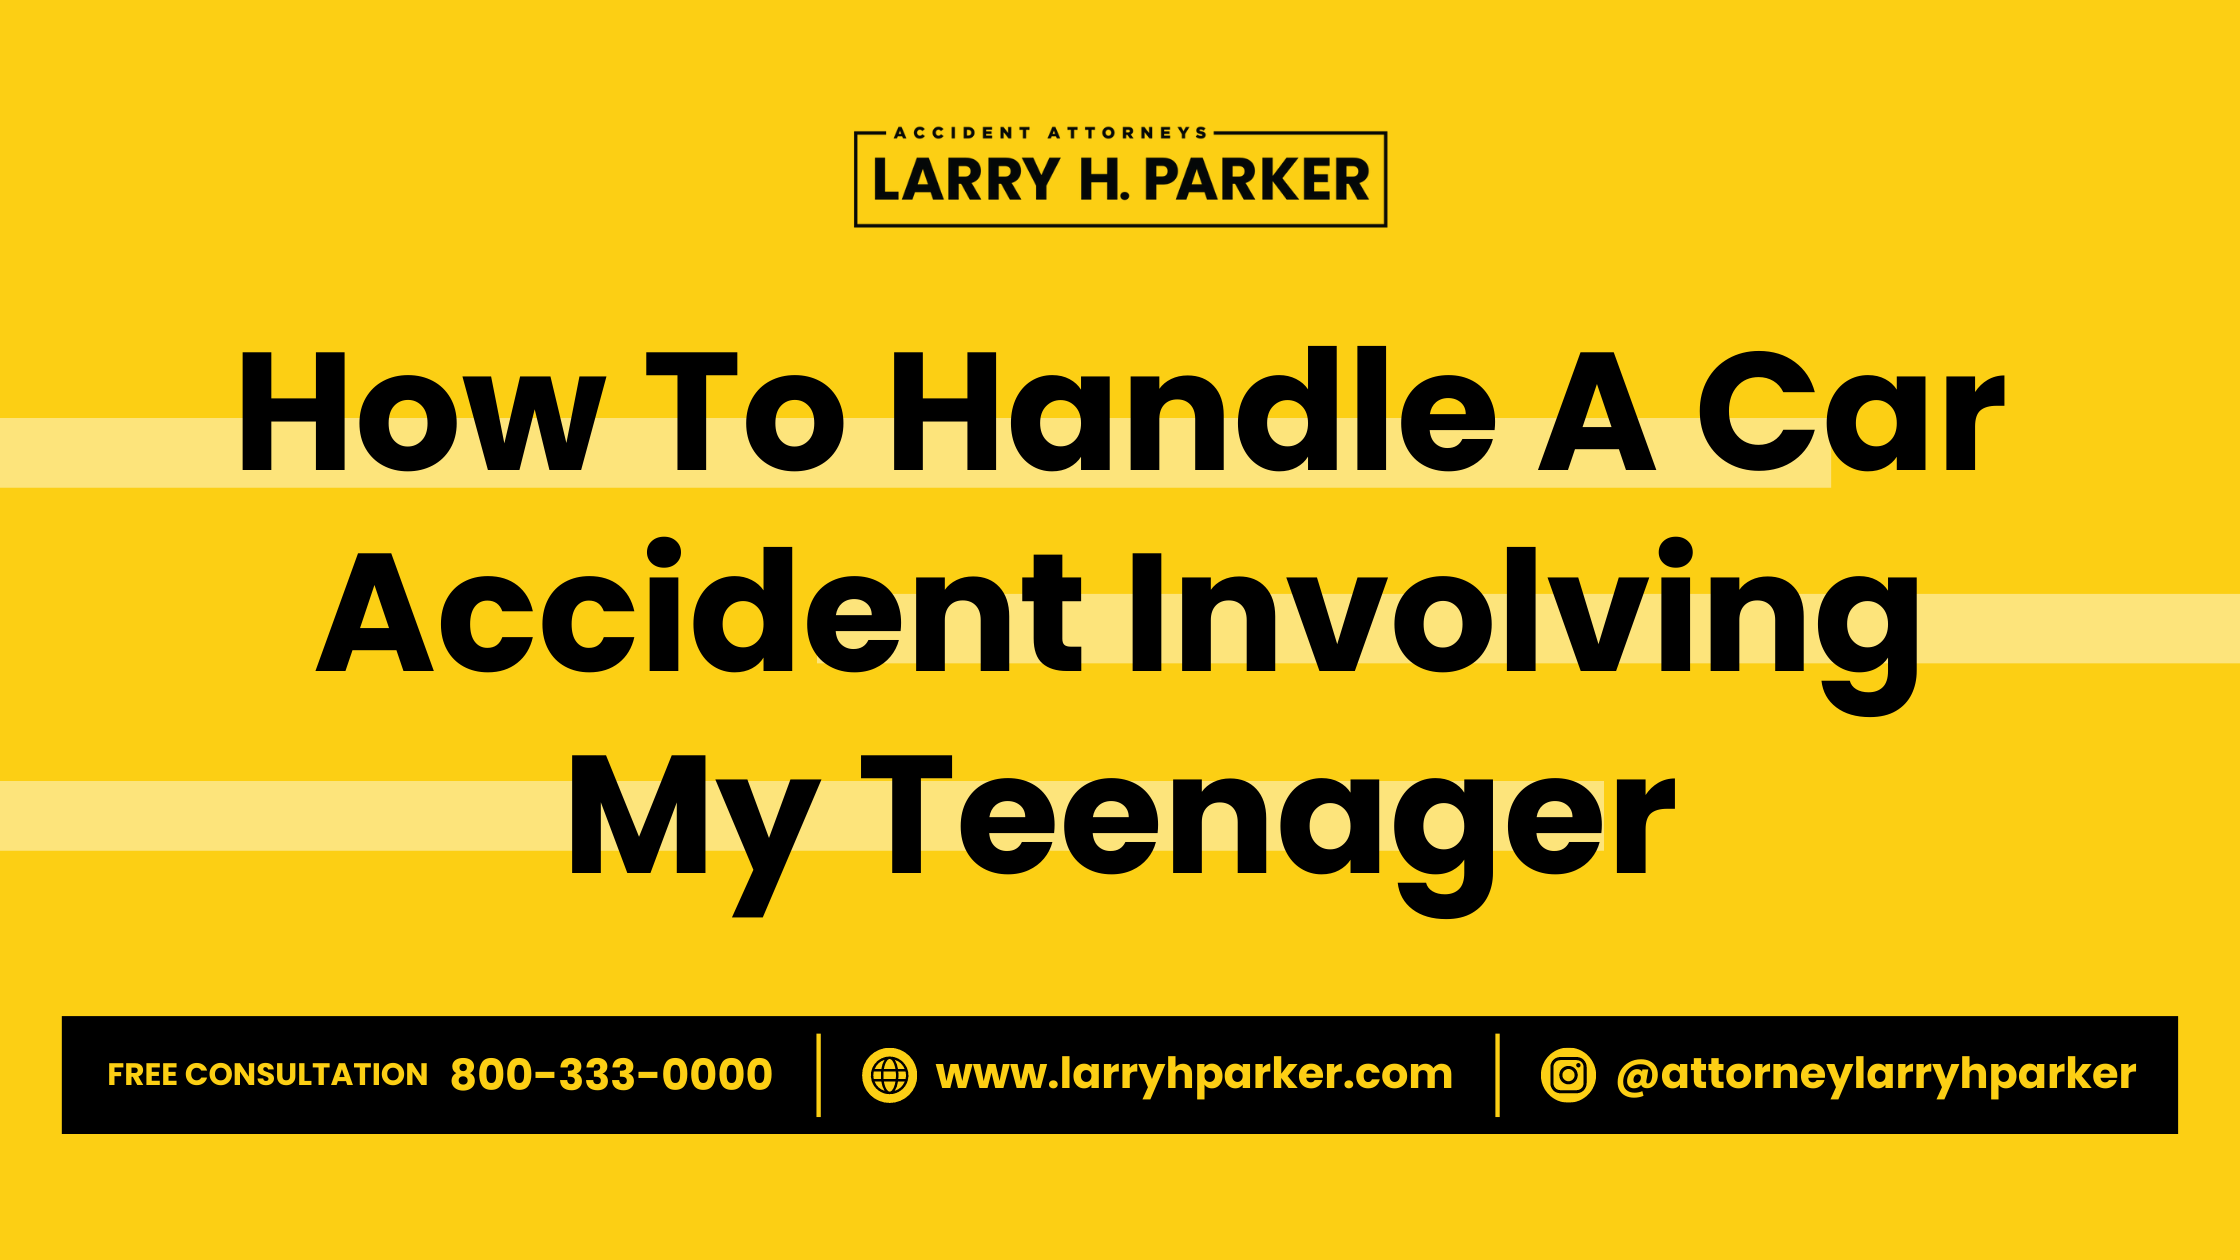 How To Handle A Car Accident Involving My Teenager